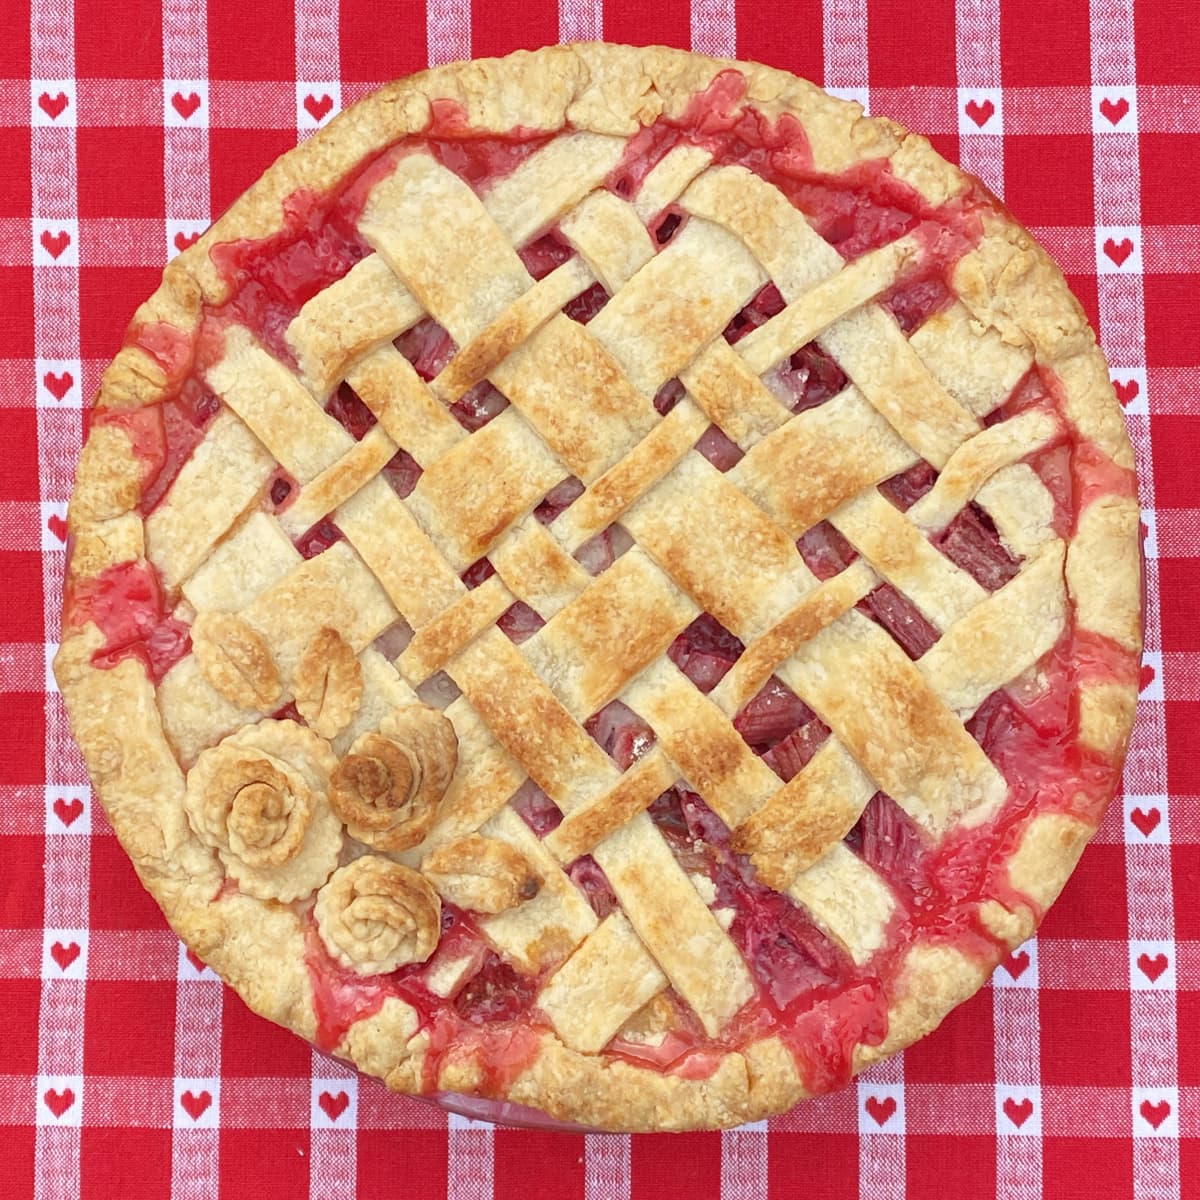 Rhubarb pie with latticed top and pastry roses, setting on a red checked tablecloth. 